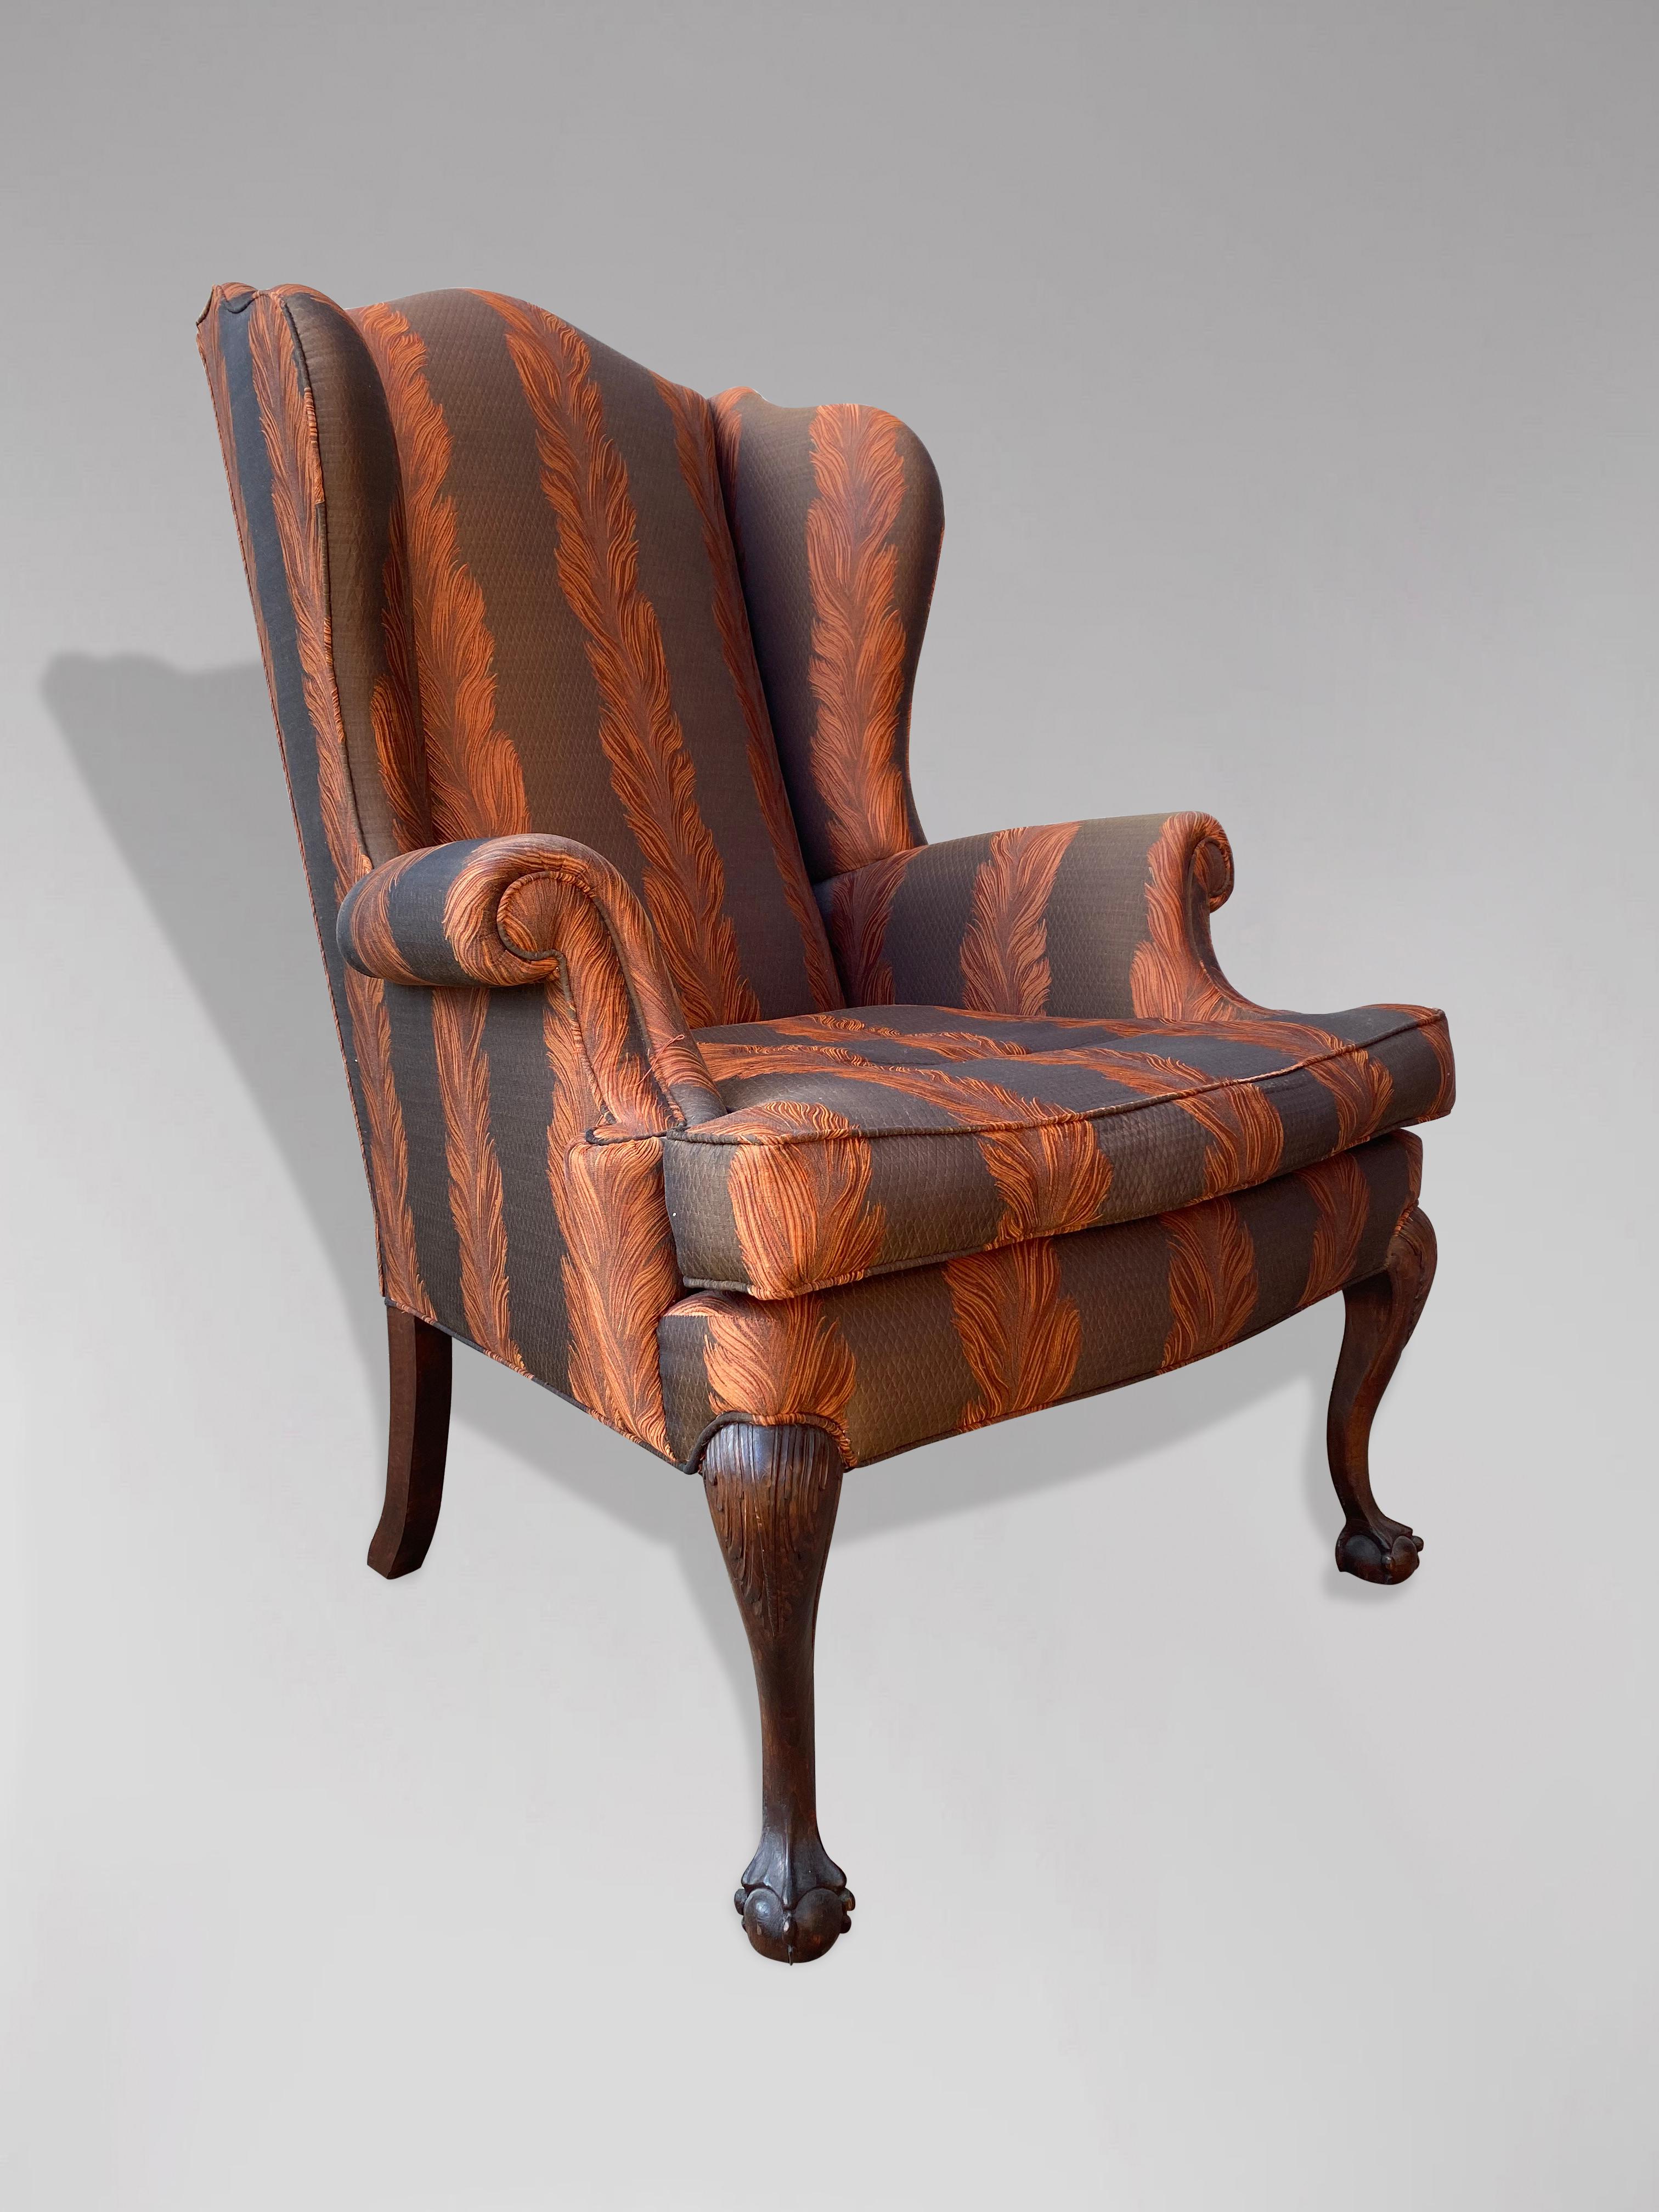 An early 20th century Edwardian period newly reupholstered wing armchair with loose feathered cushion, standing on mahogany carved cabriole legs ending on claw and ball feet. All recently fully reupholstered in a quality fabric. Very comfortable.